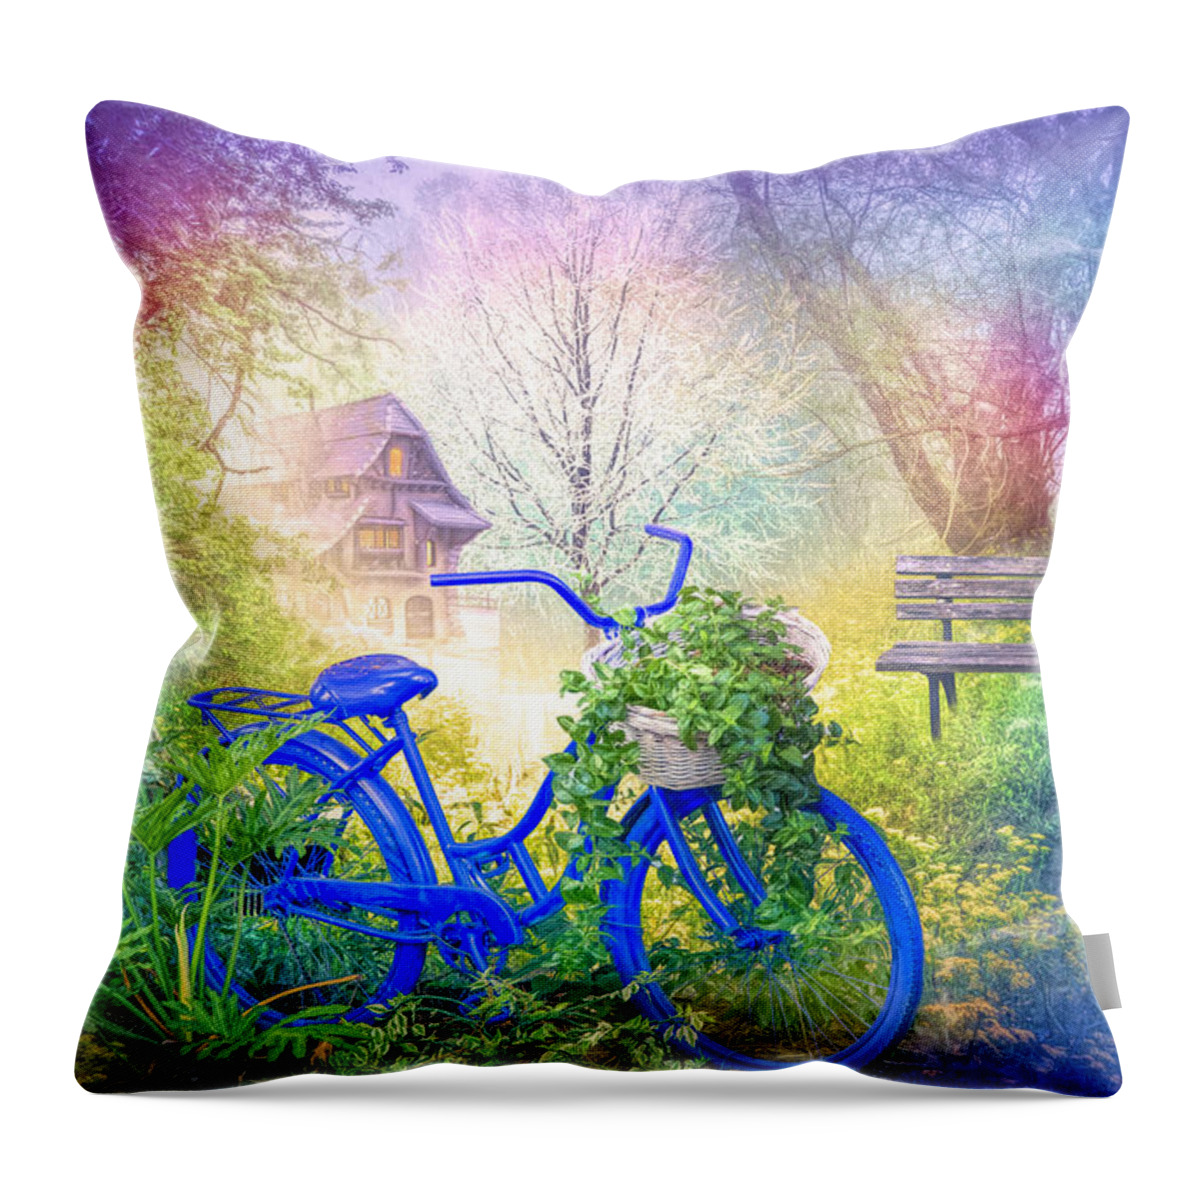 Barn Throw Pillow featuring the photograph Bicycle in the Mist by Debra and Dave Vanderlaan